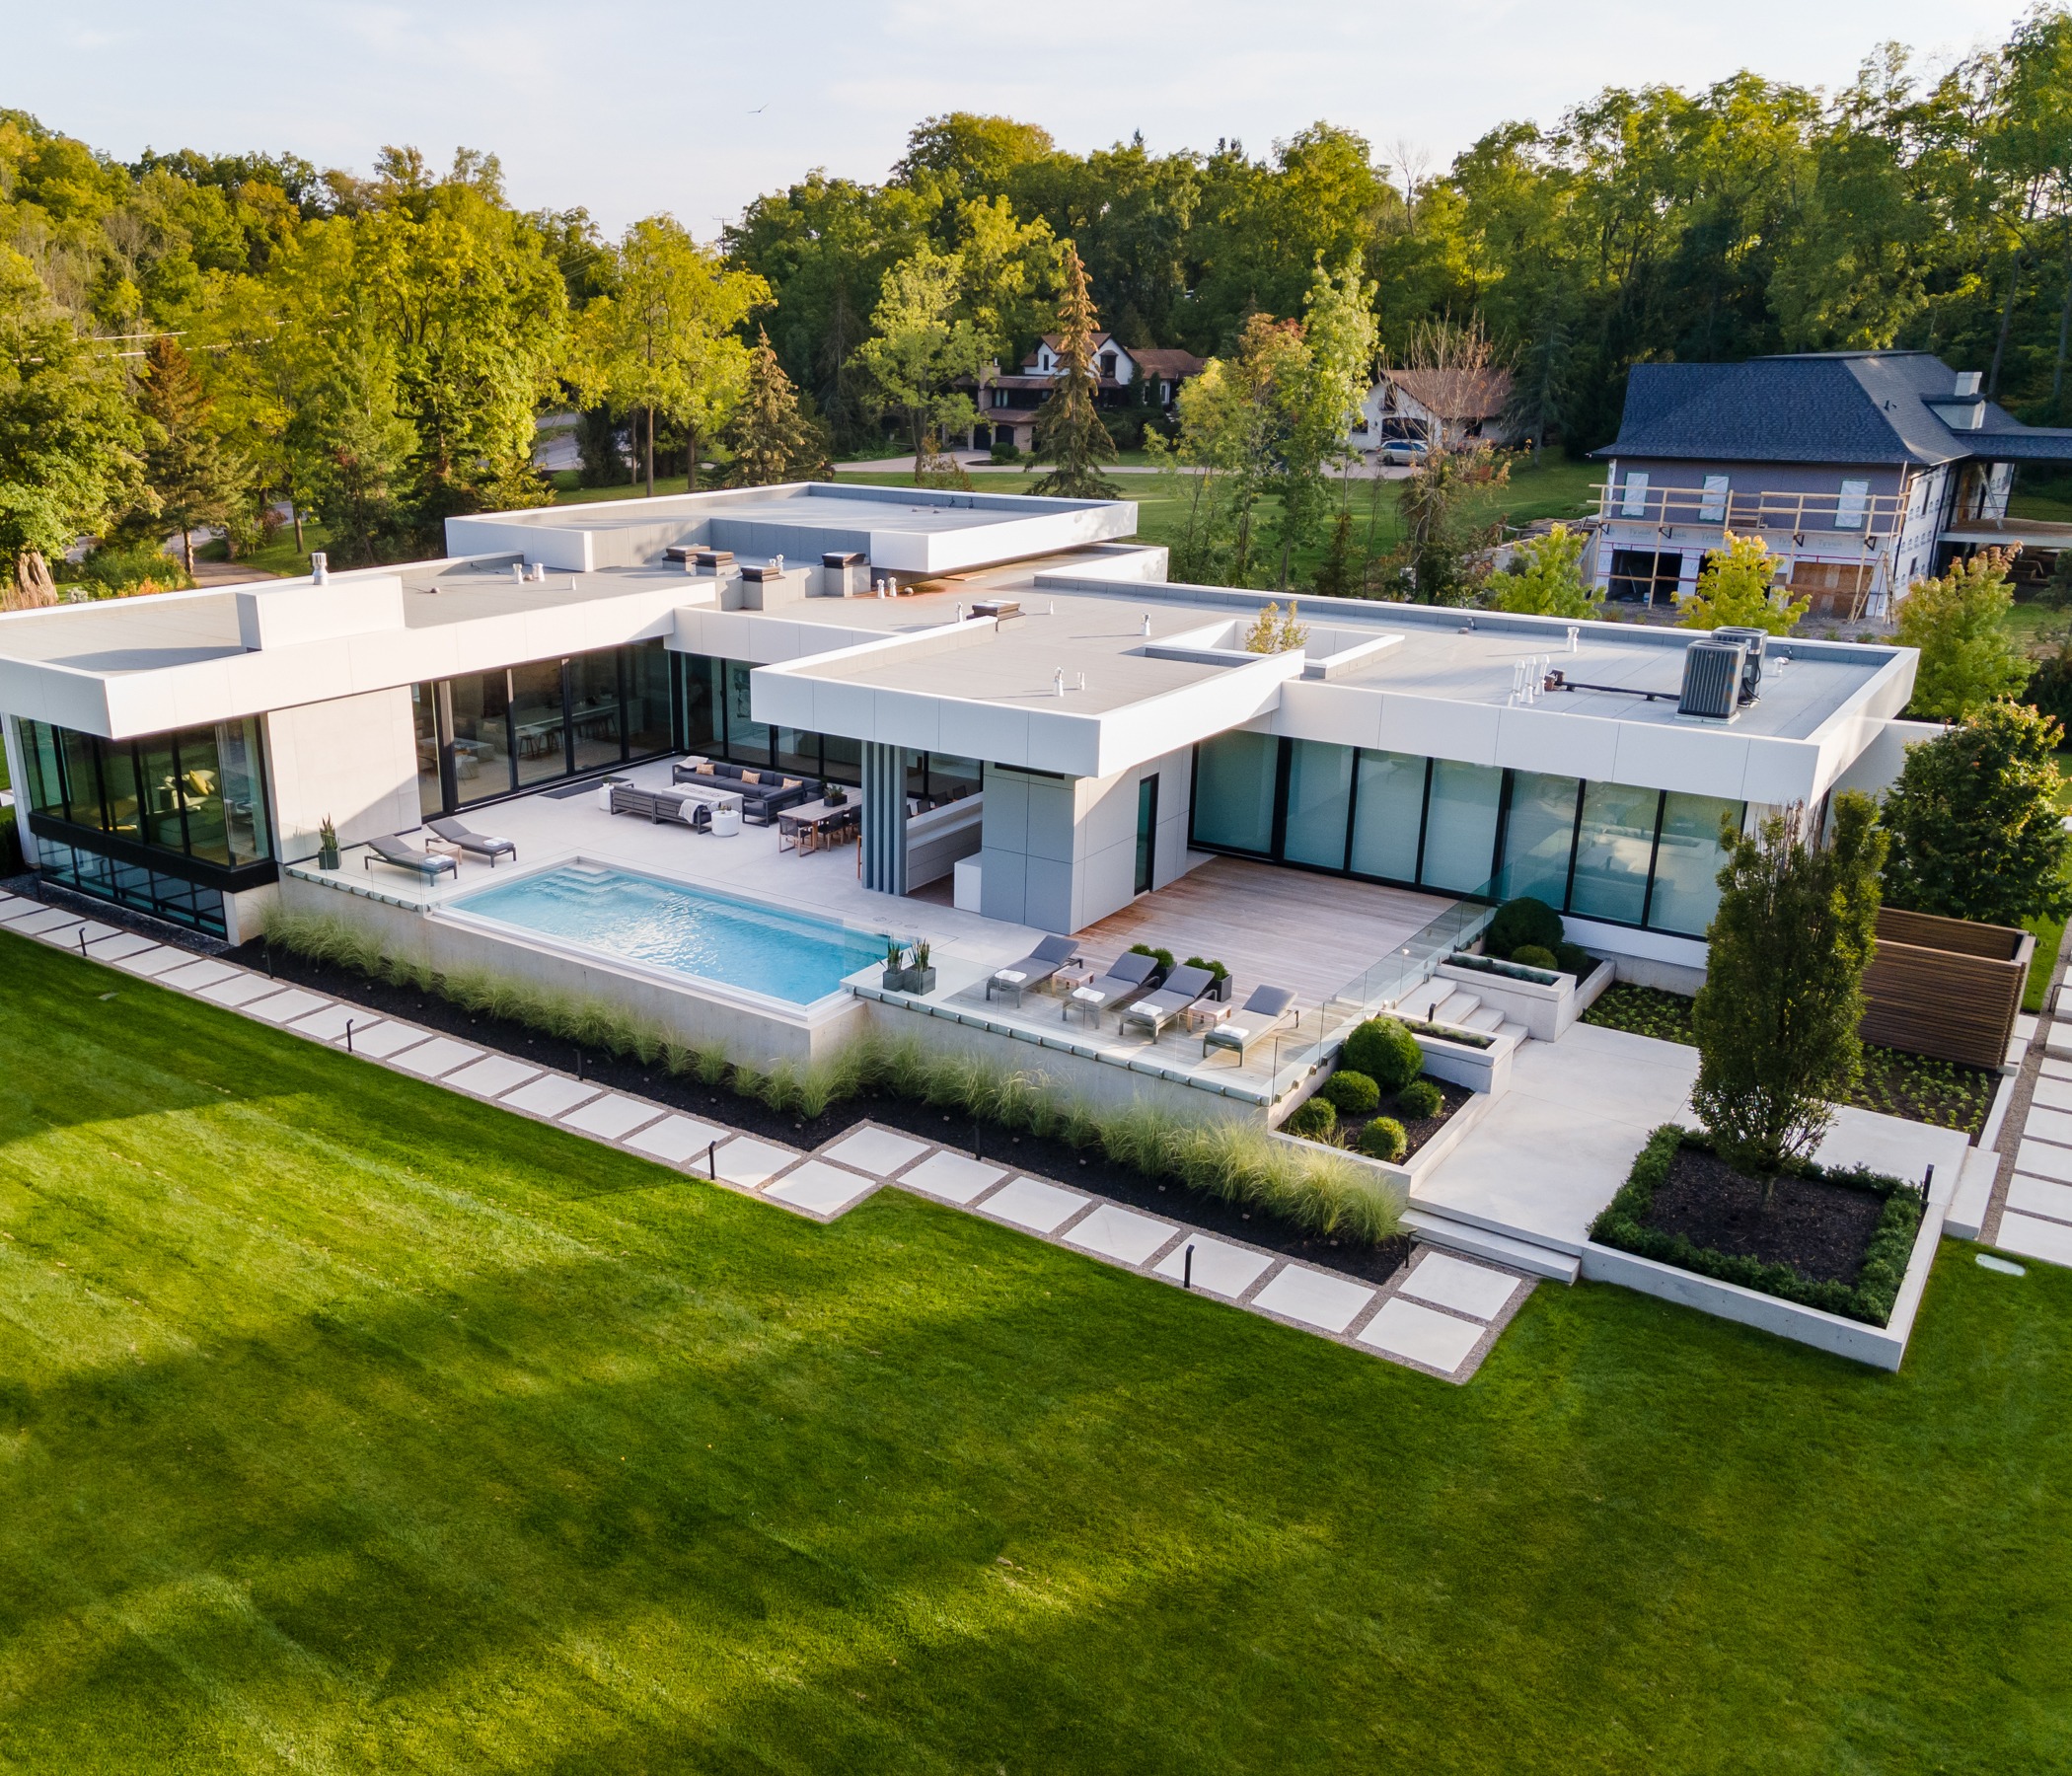 An aerial view showcases a luxurious modern home with flat roofs, expansive glass walls, an outdoor swimming pool, and well-manicured lawn and hedges.